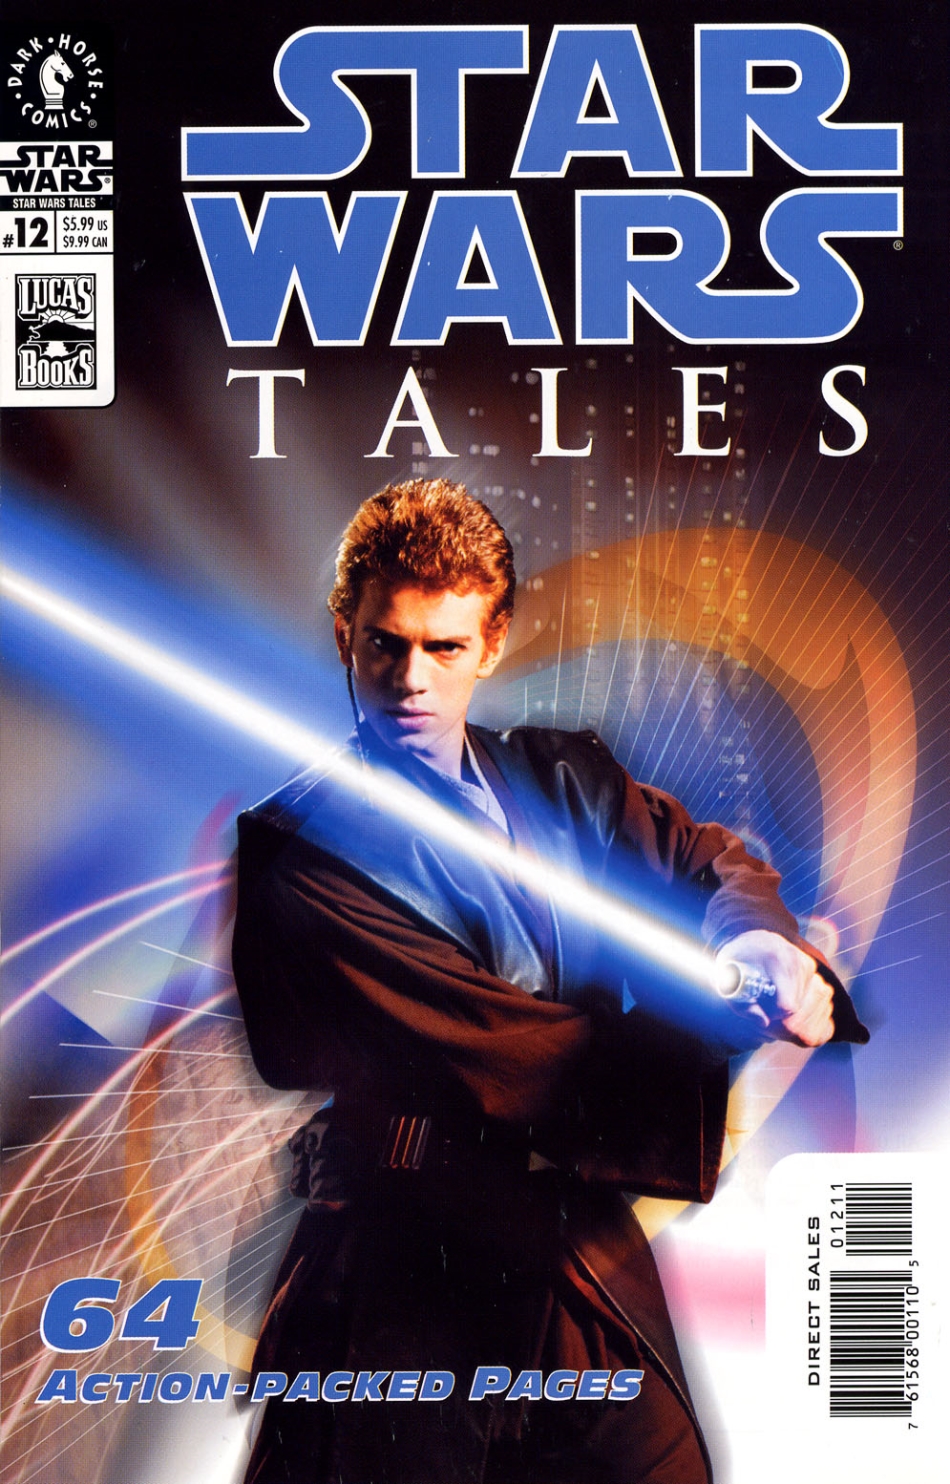 Star Wars Tales #12 (Photo Cover)